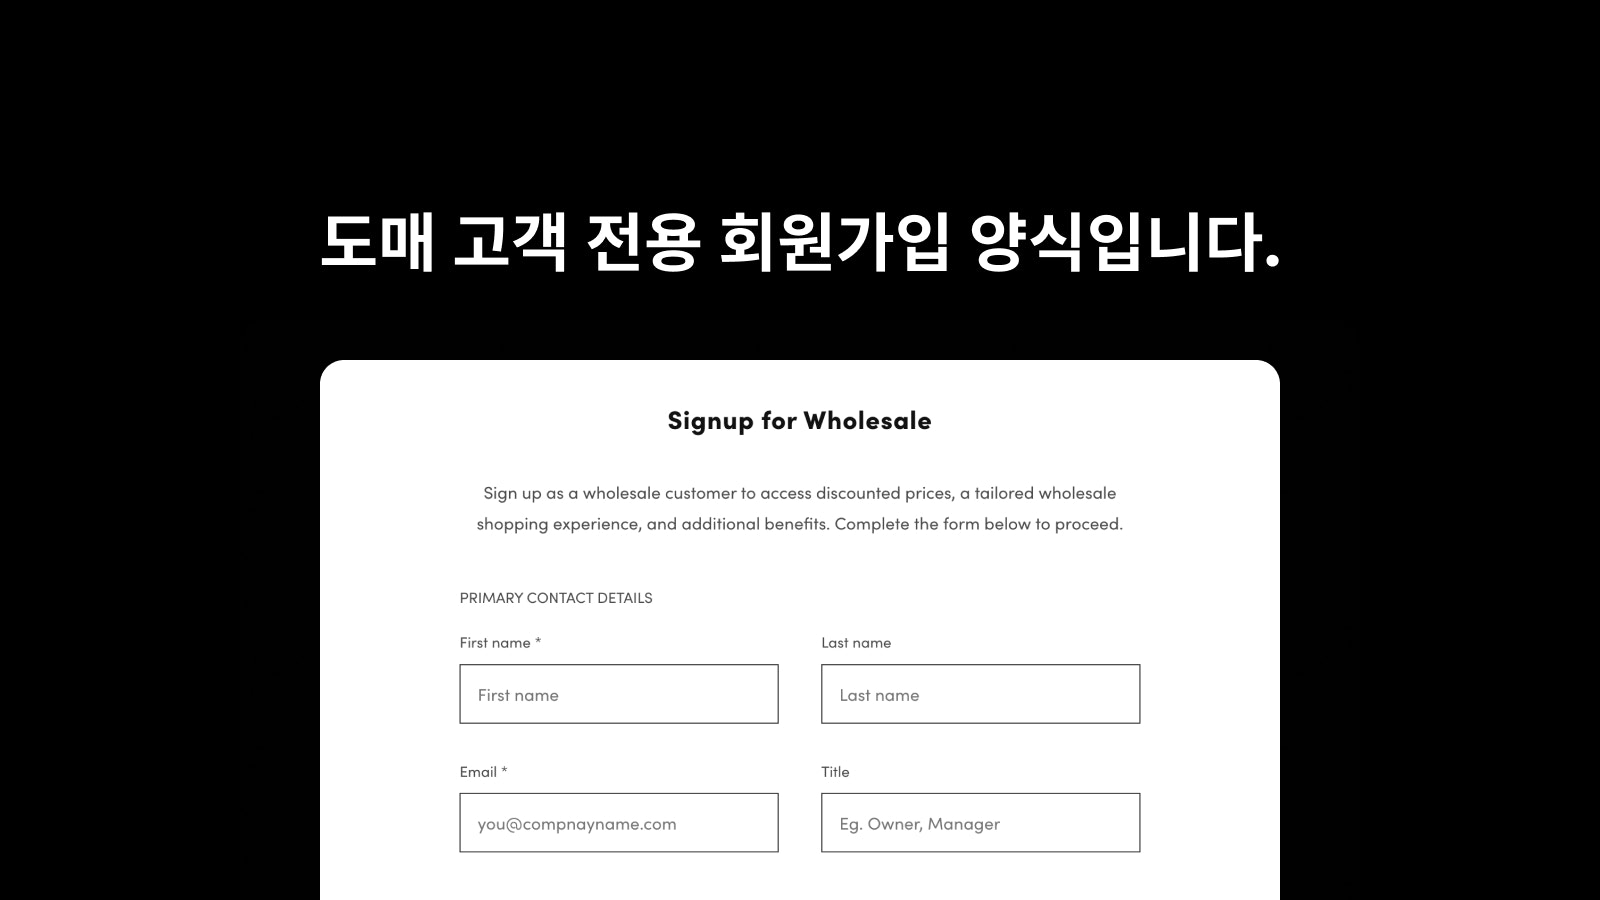 Exclusive sign-up form for  wholesale and B2B customers